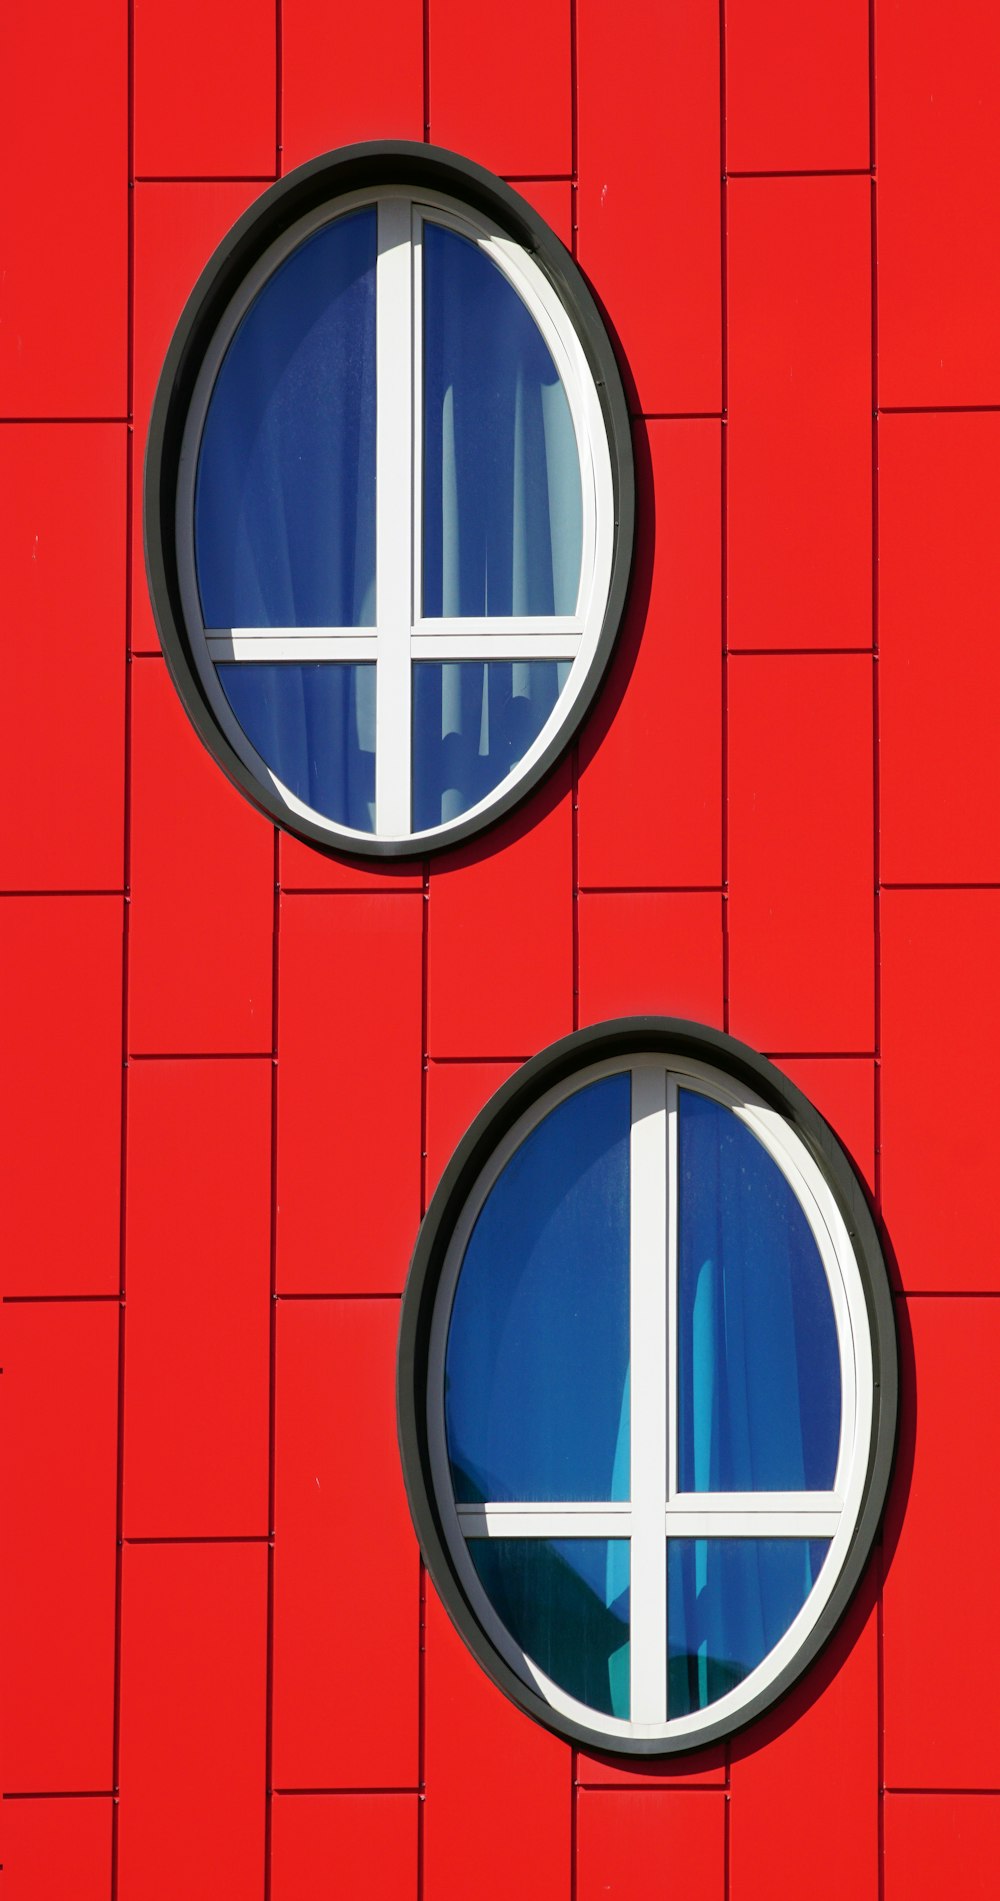 two round windows on the side of a red building